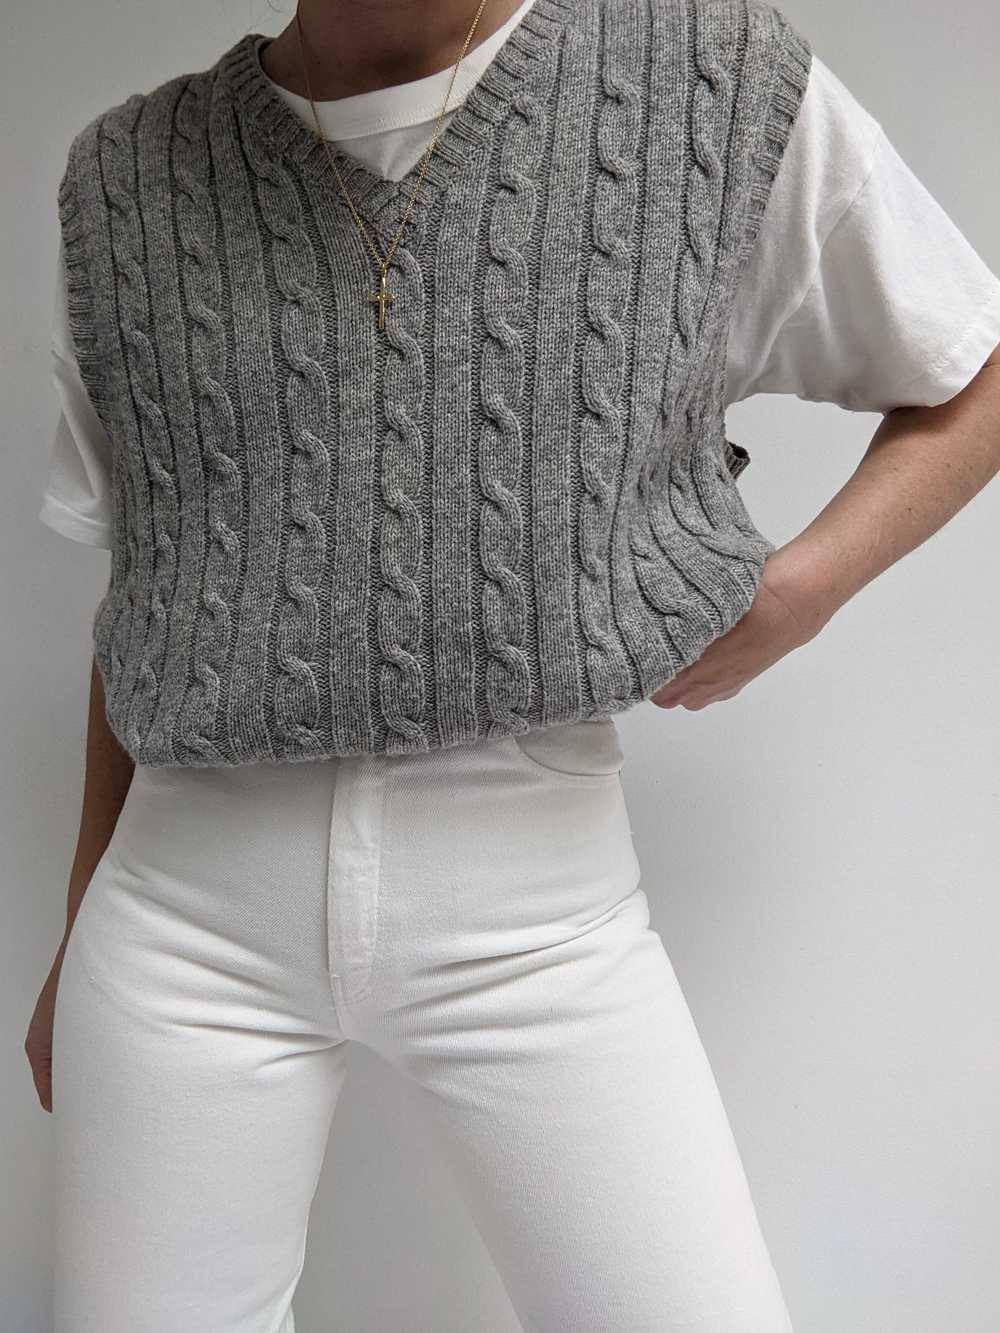 Vintage Grey Cable Knit Lambswool Sweater Vest - image 5